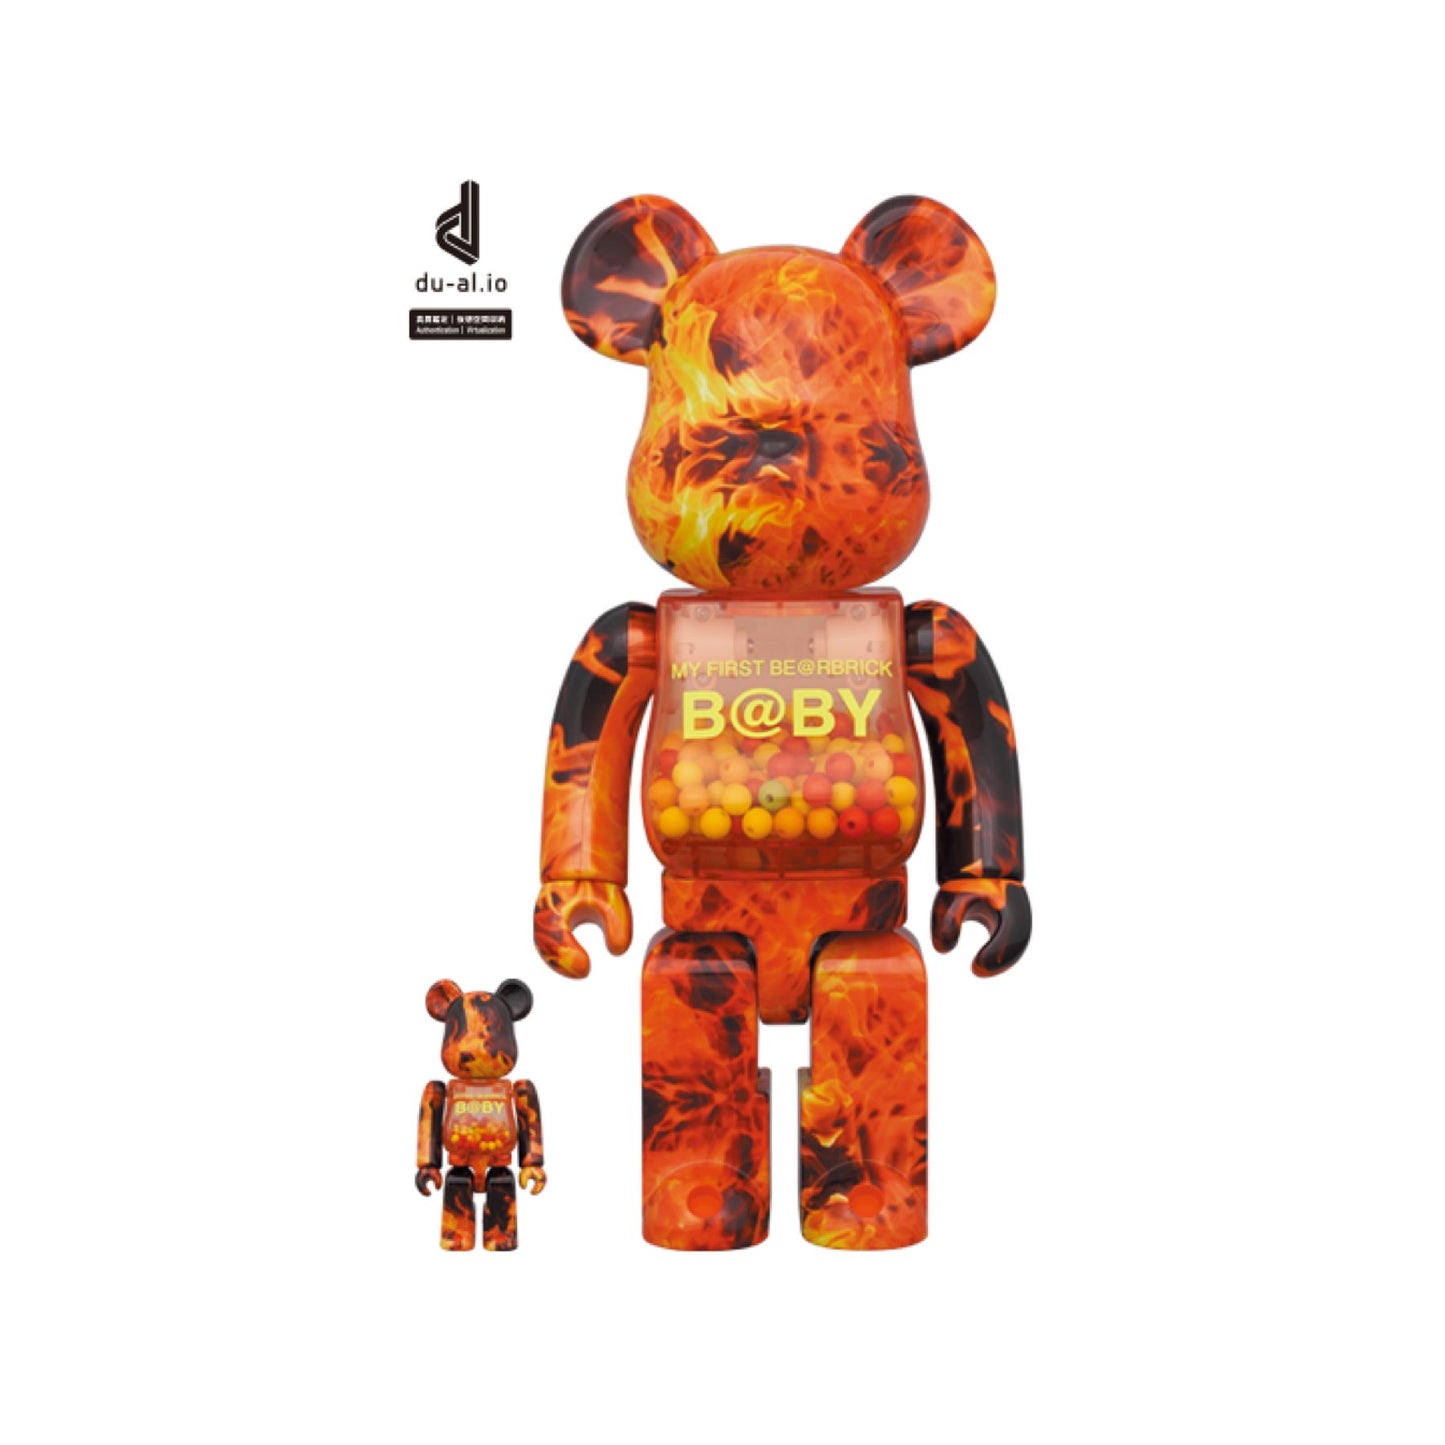 100％ & 400％ Be@rbrick MY FIRST BE@RBRICK B@BY FLAME Ver.